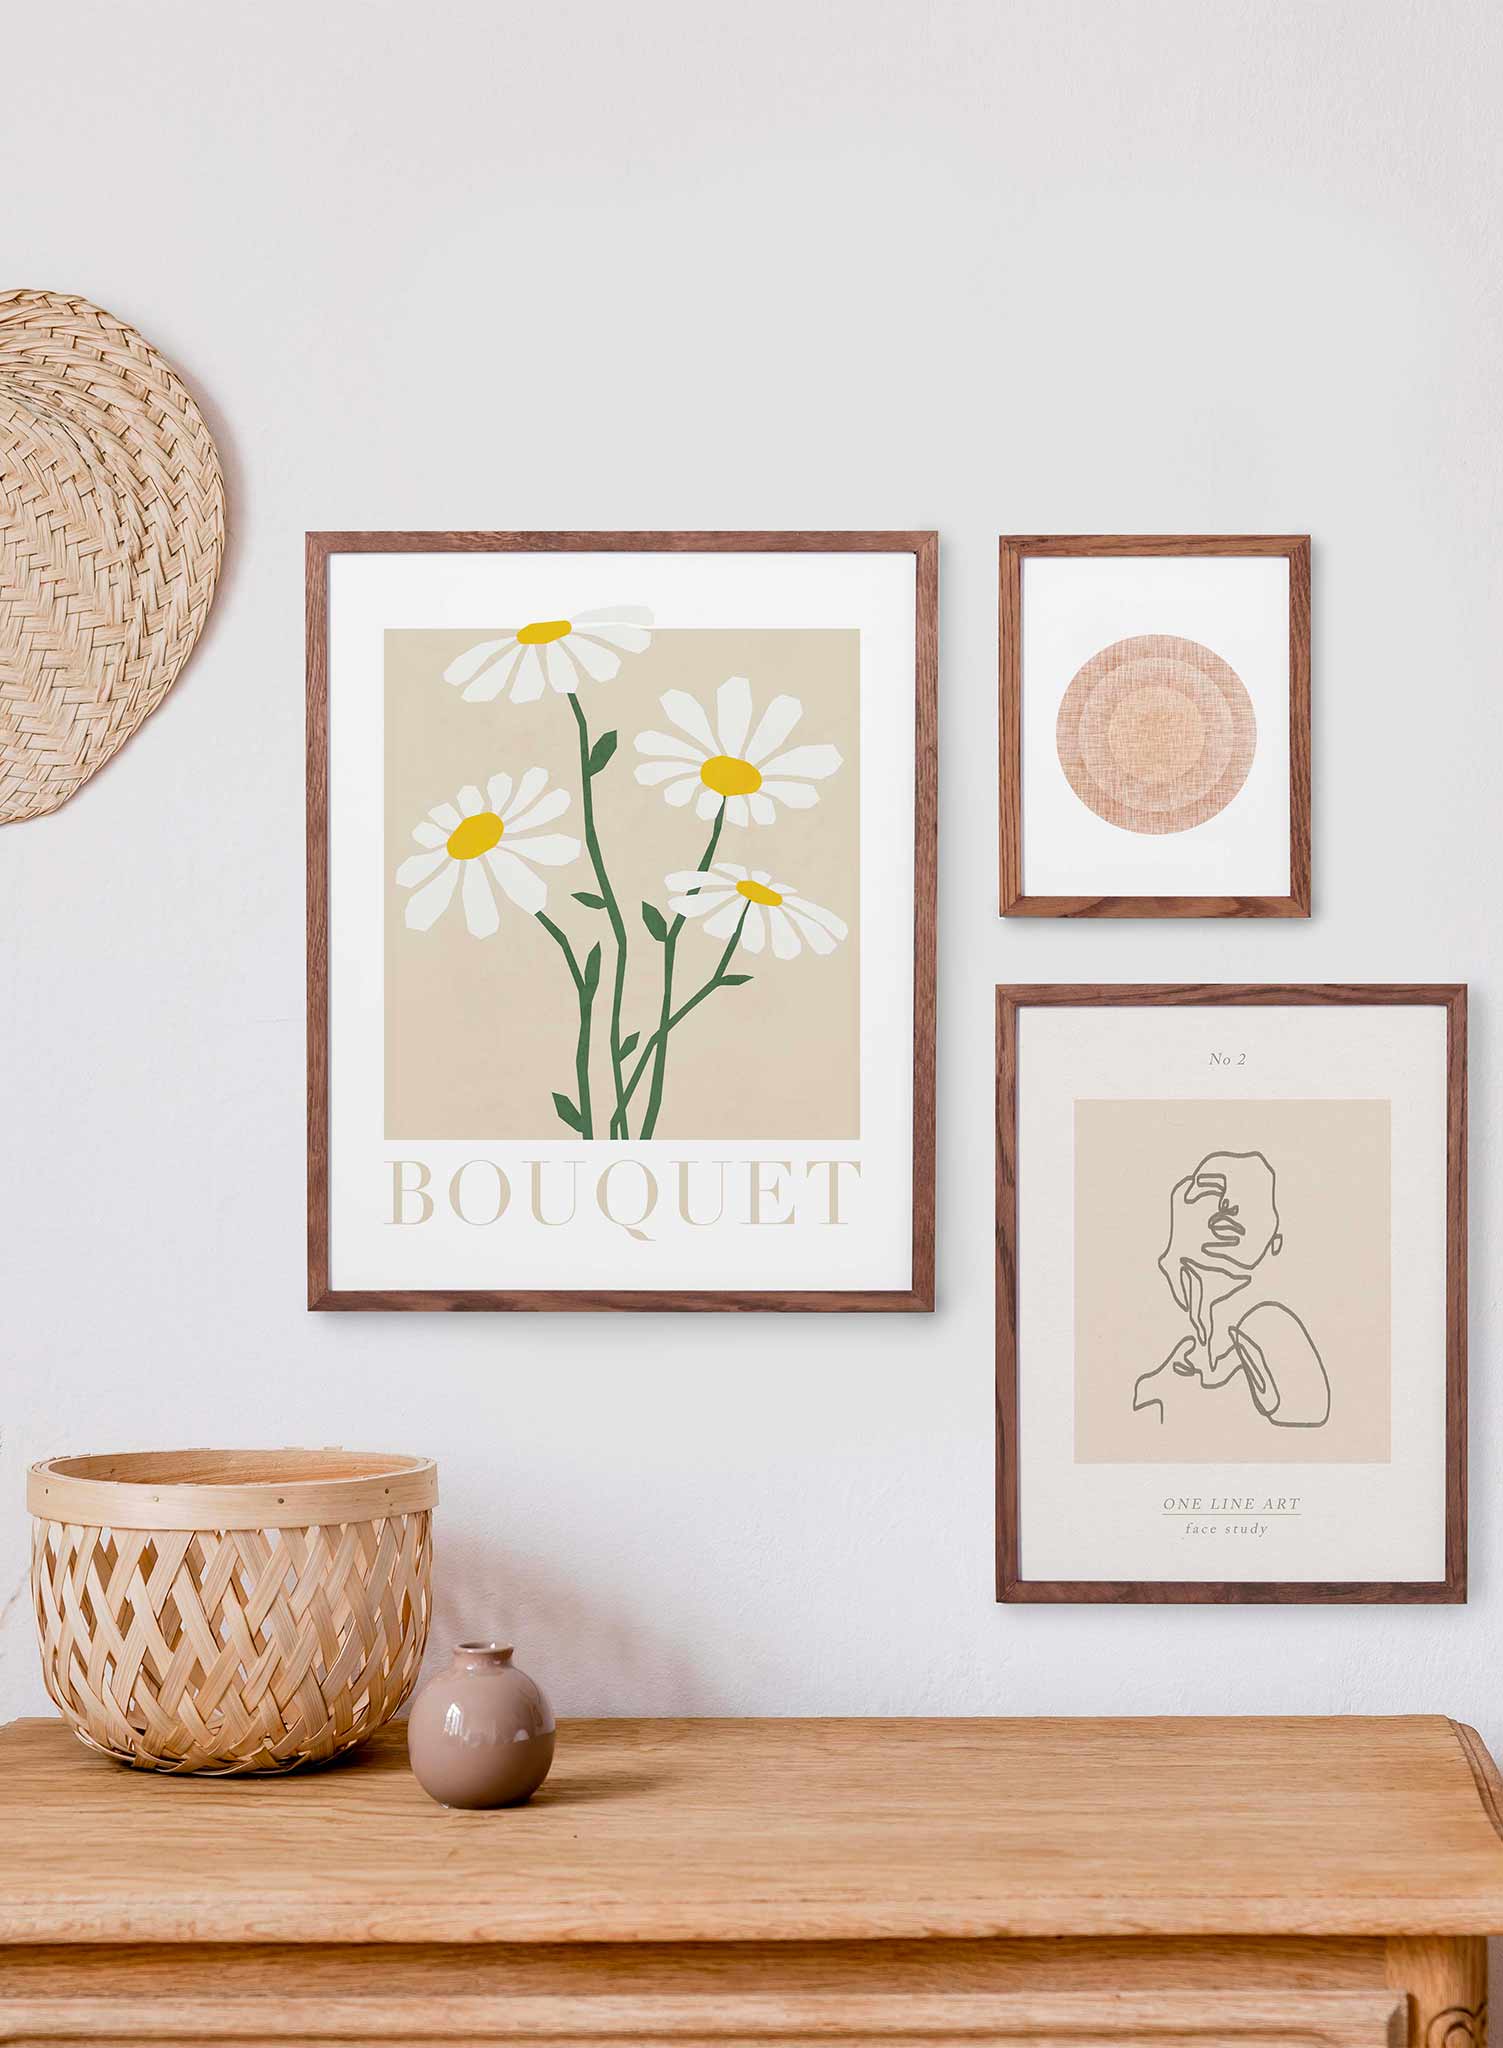 Lovely Daisies is a vector illustration of four big white daisies by Opposite Wall.